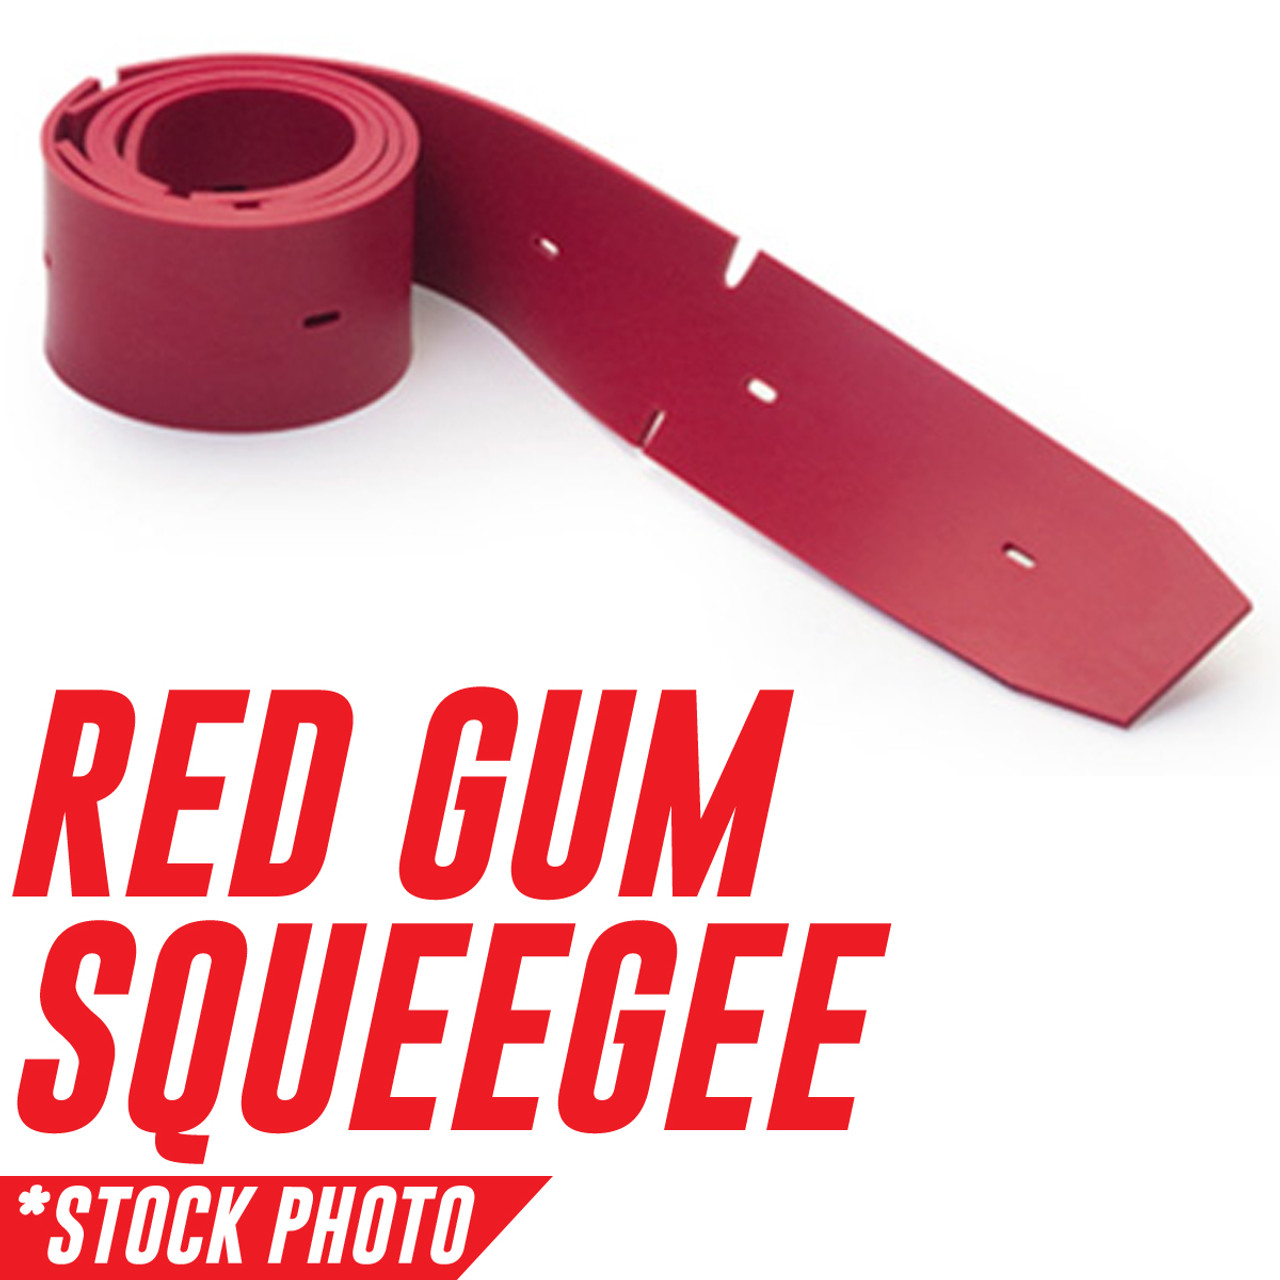 374085: Squeegee, Front, Red Gum fits Tennant Models 5700 Tight Aisle